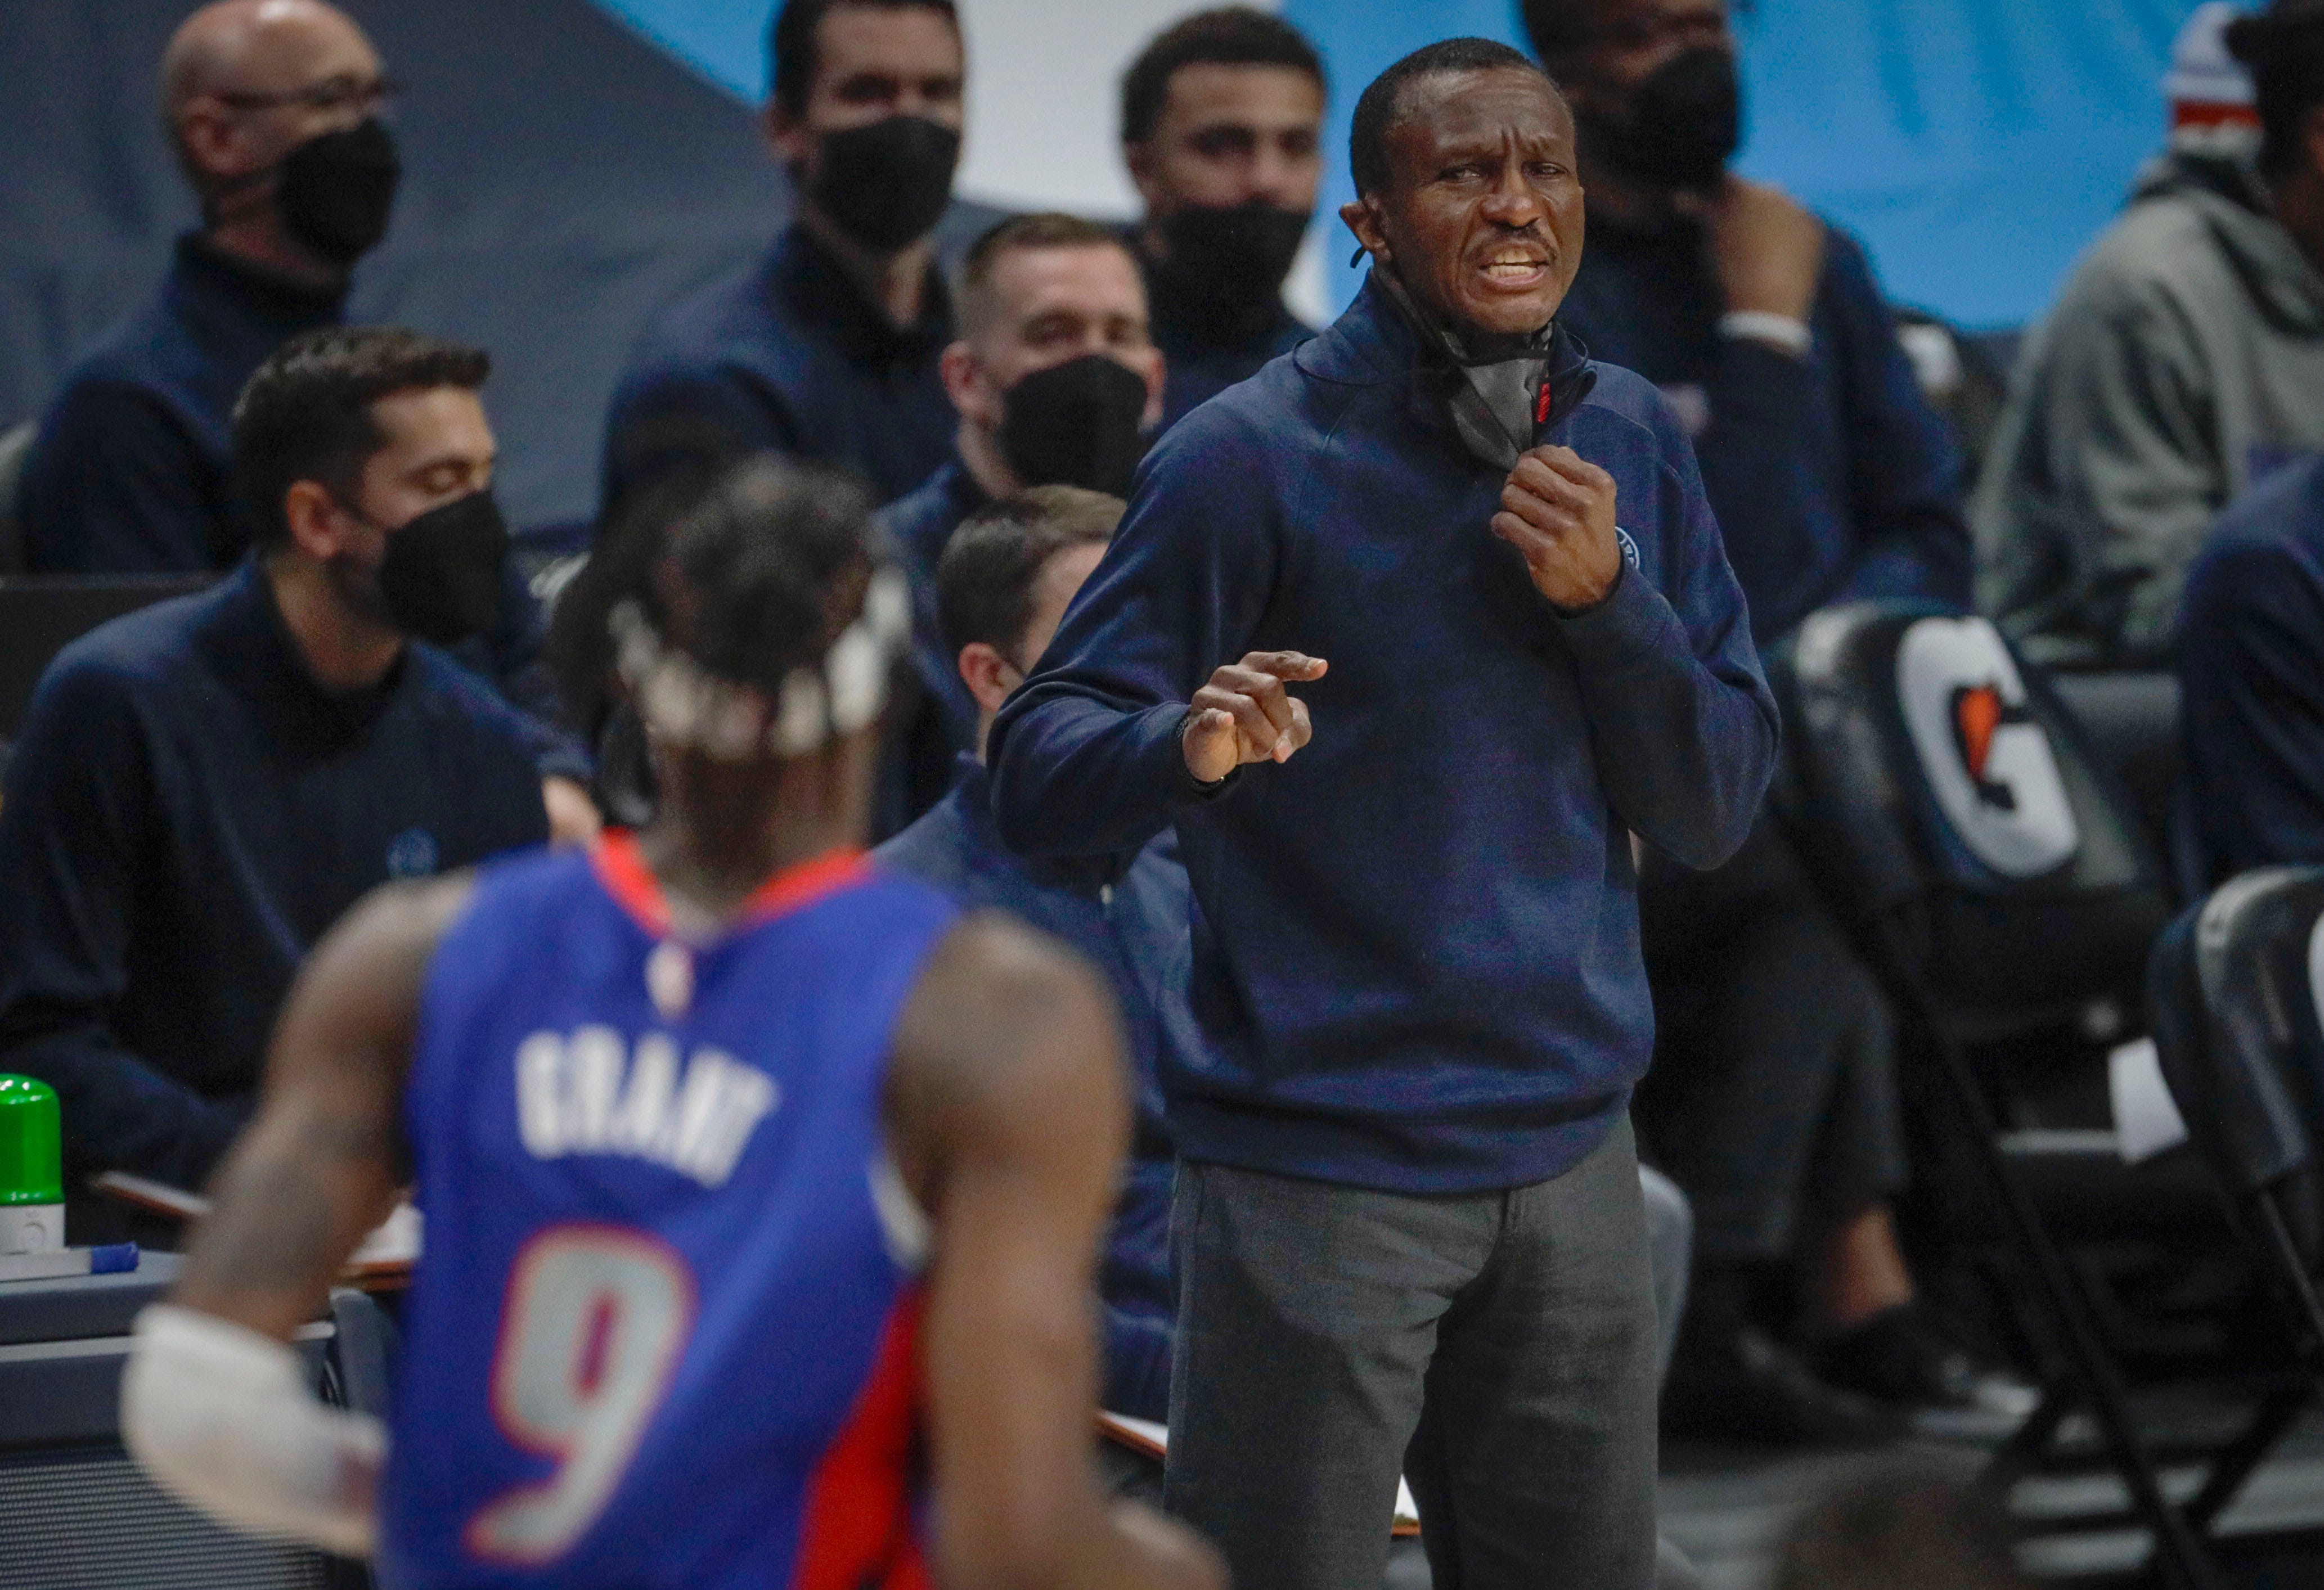 Detroit Pistons coach Dwane Casey shouts to Pistons forward Jerami Grant (9) in the second quarter of an NBA basketball game against the Denver Nuggets in Denver, Tuesday, April 6, 2021.